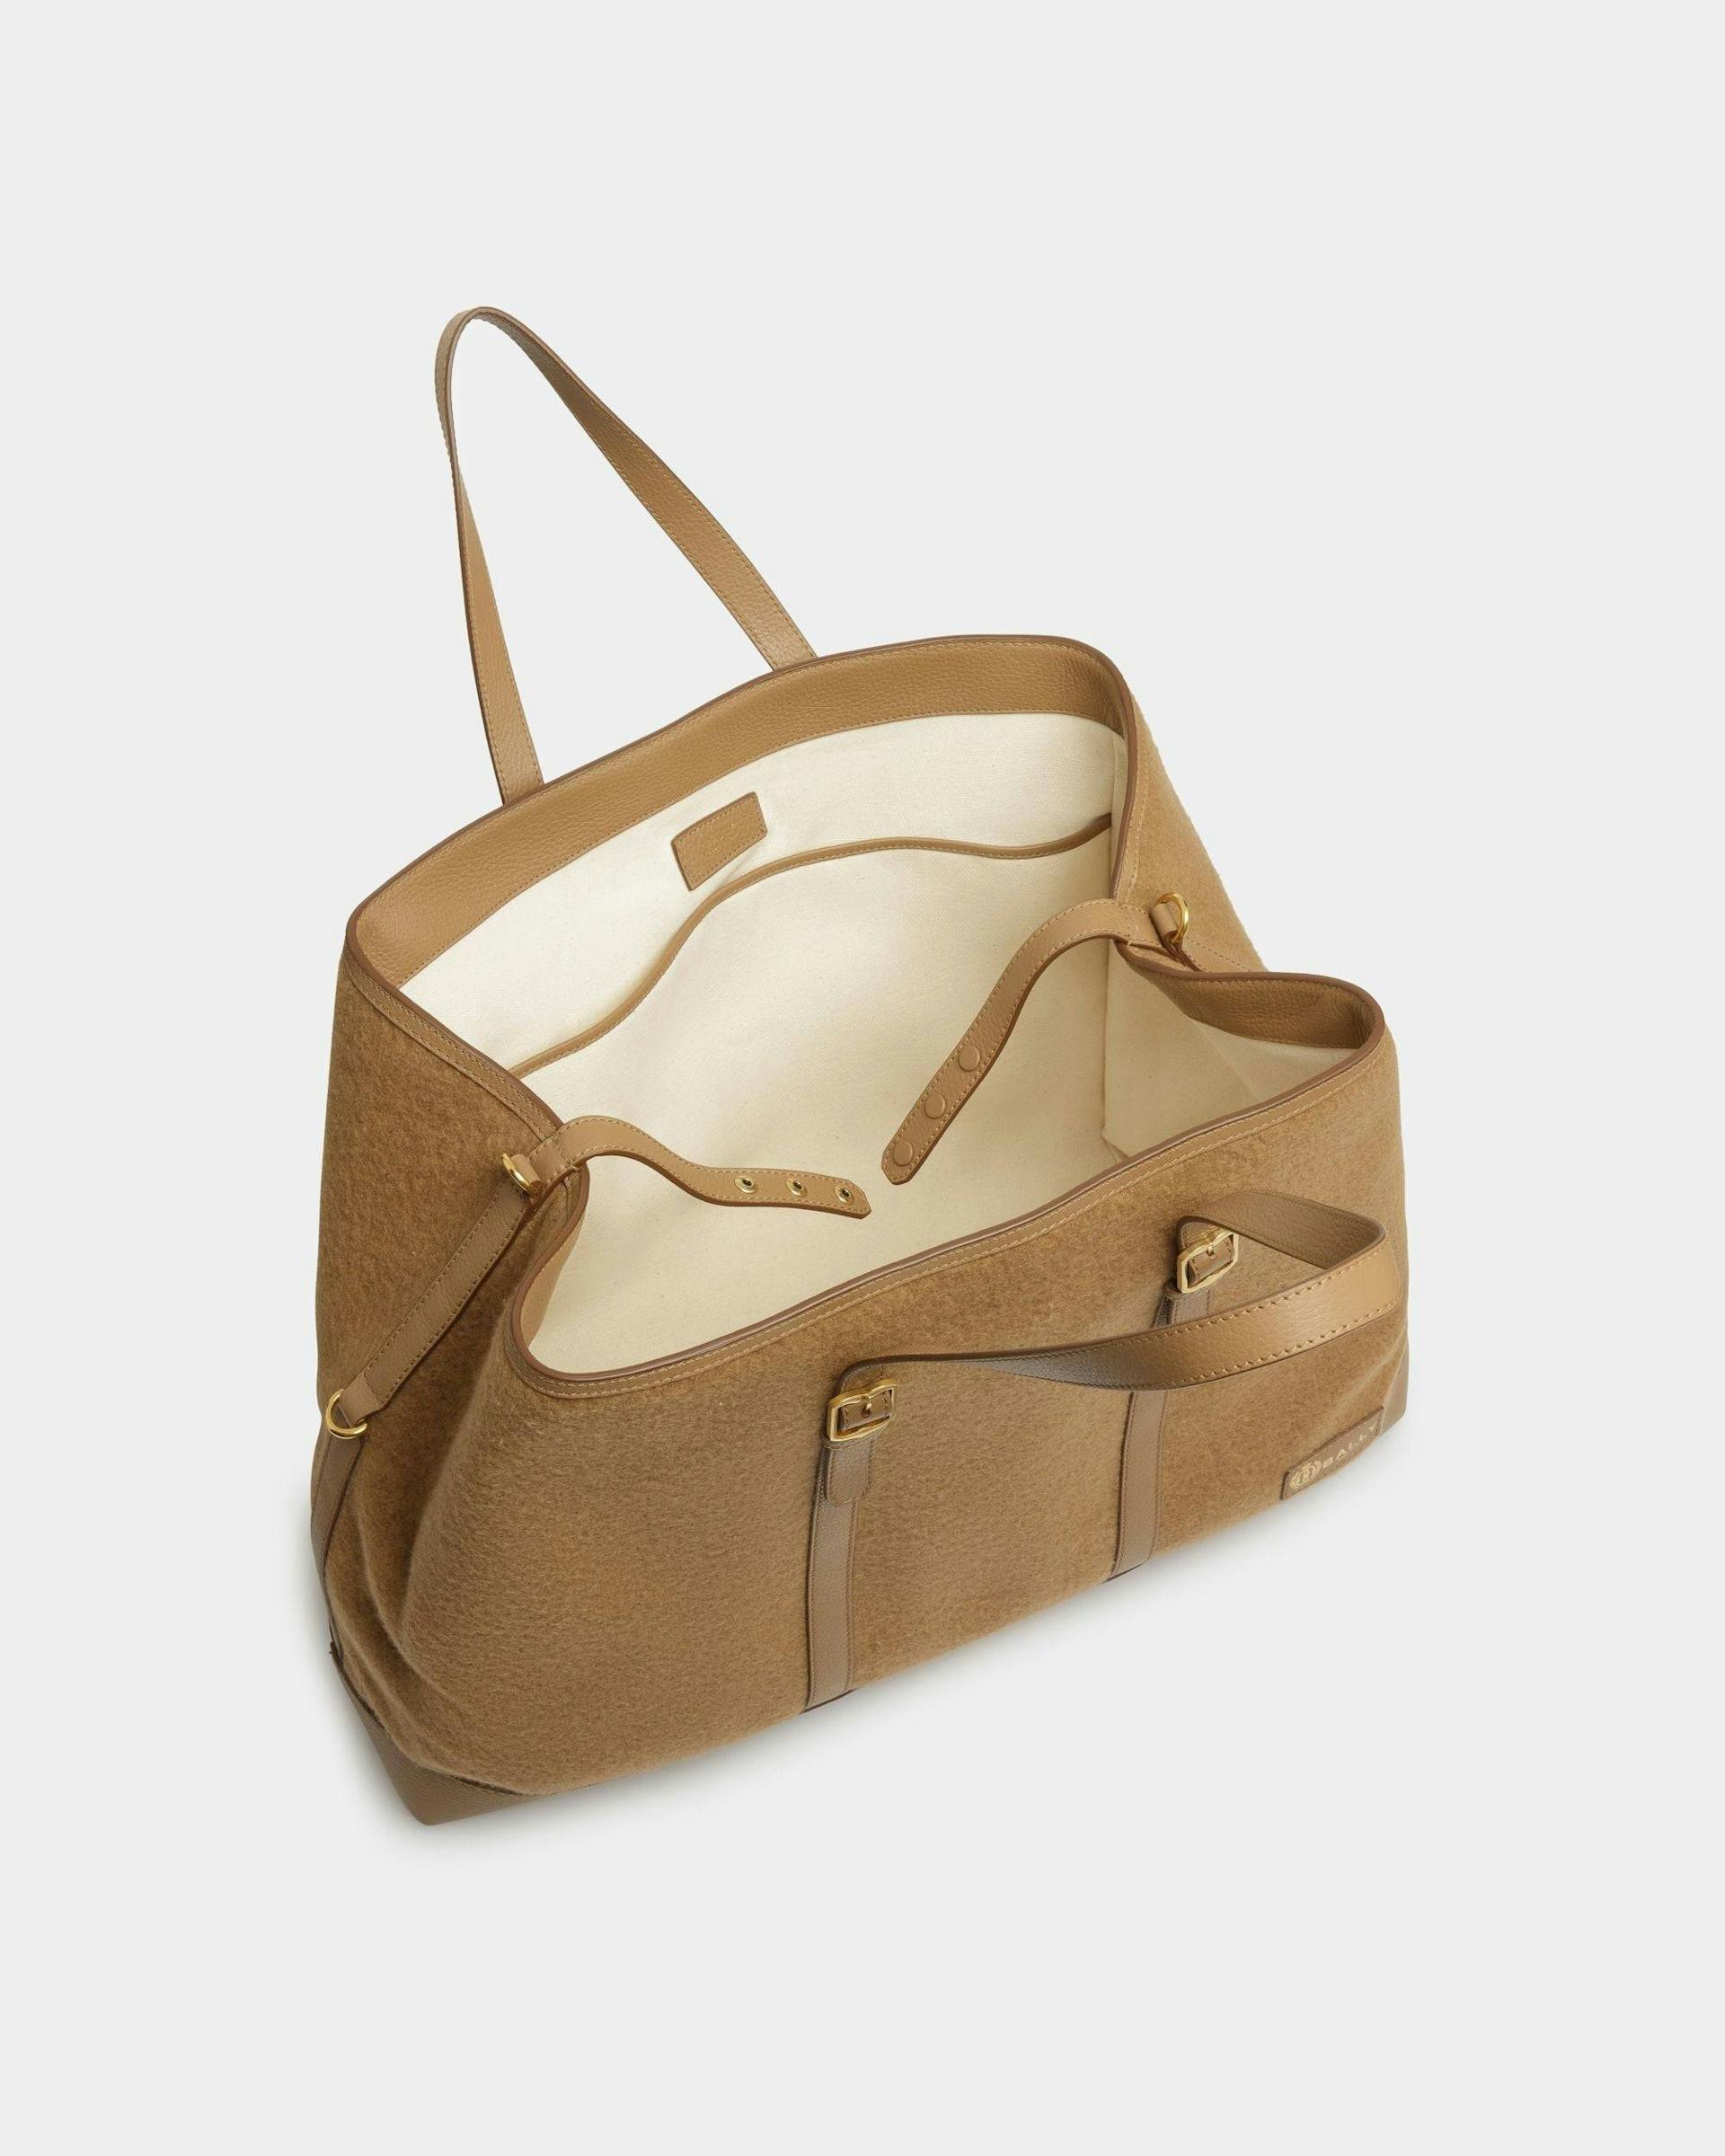 Gare Tote Bag In Camel Leather And Fabric - Men's - Bally - 05